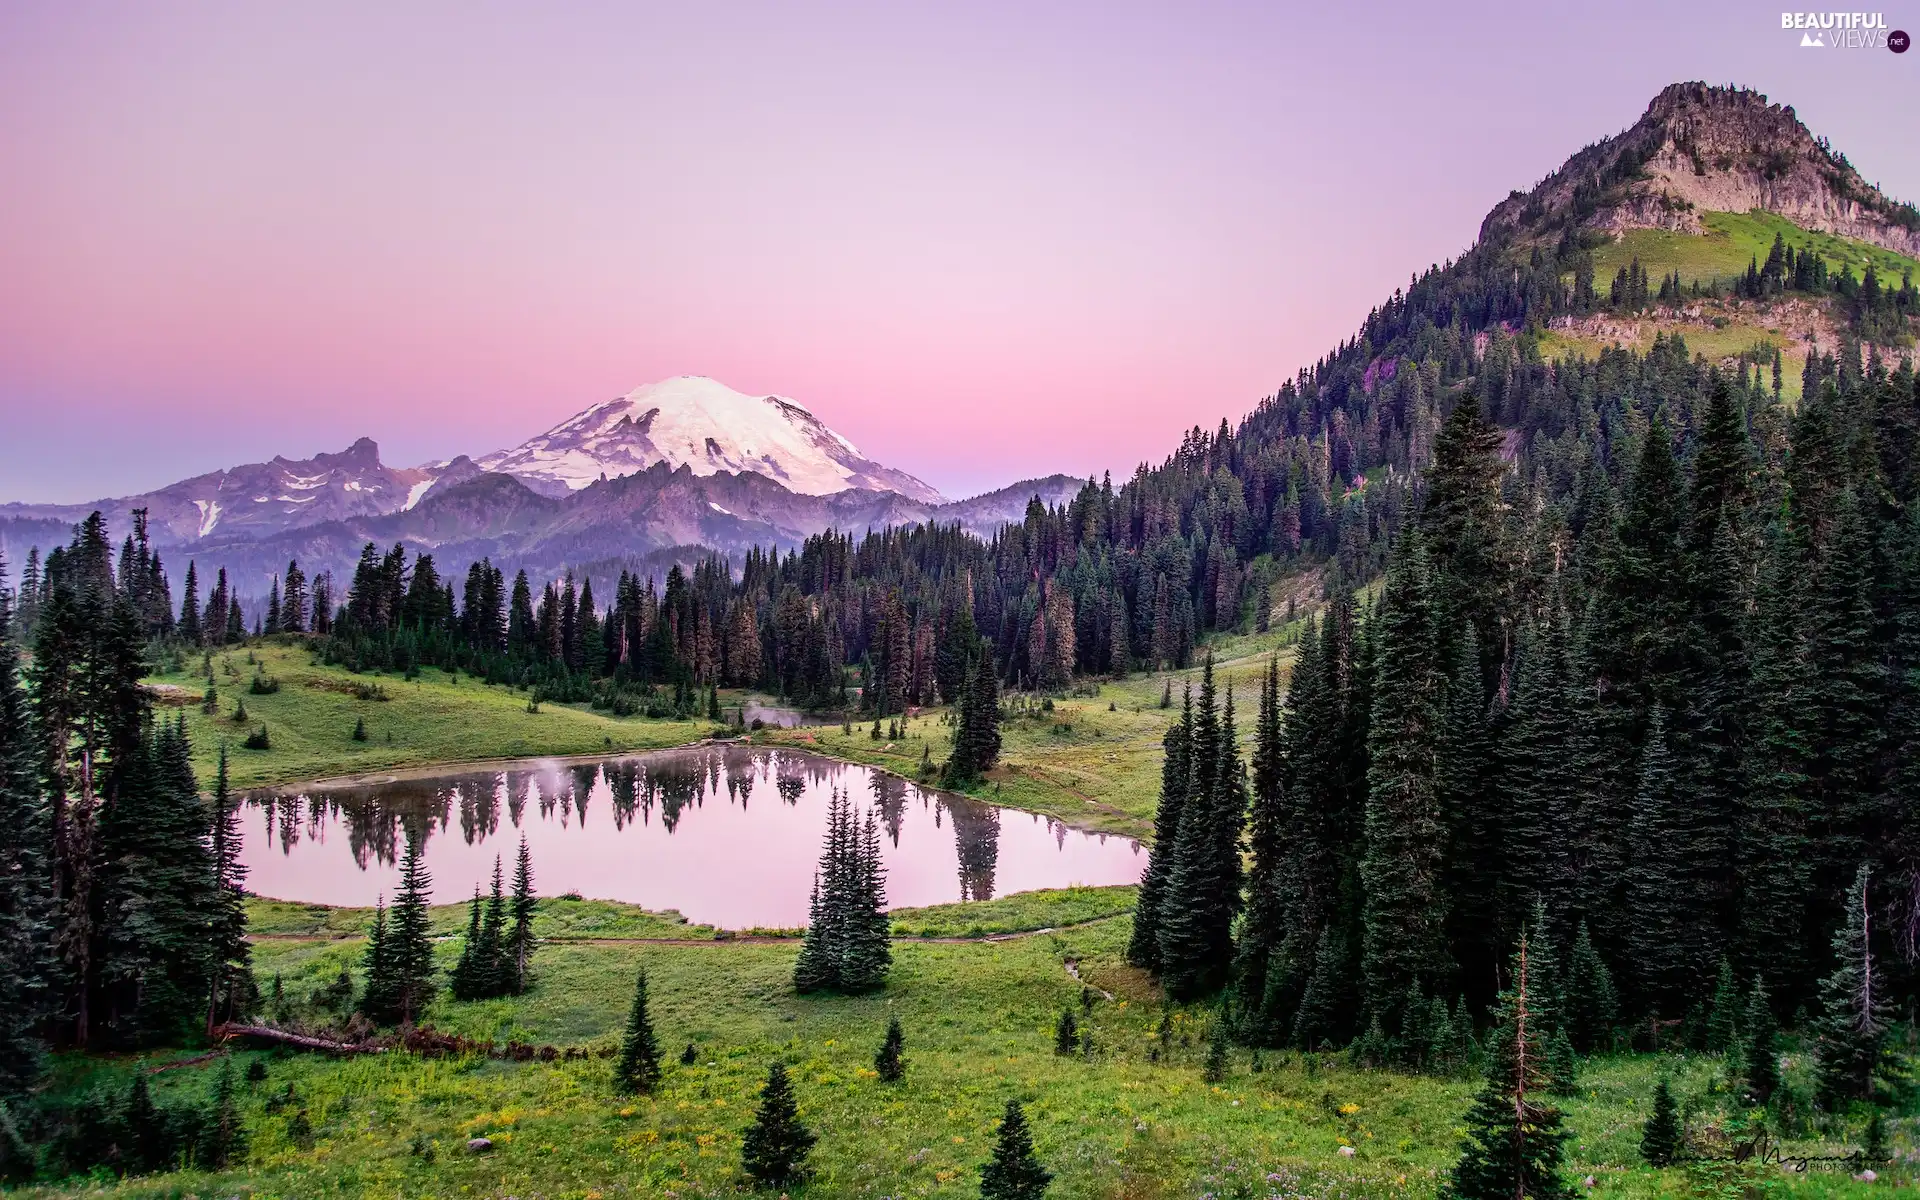 Stratovolcano Mount Rainier, The United States, grass, Meadow, trees, Mountains, Spruces, Mount Rainier National Park, Washington State, viewes, Pond - car